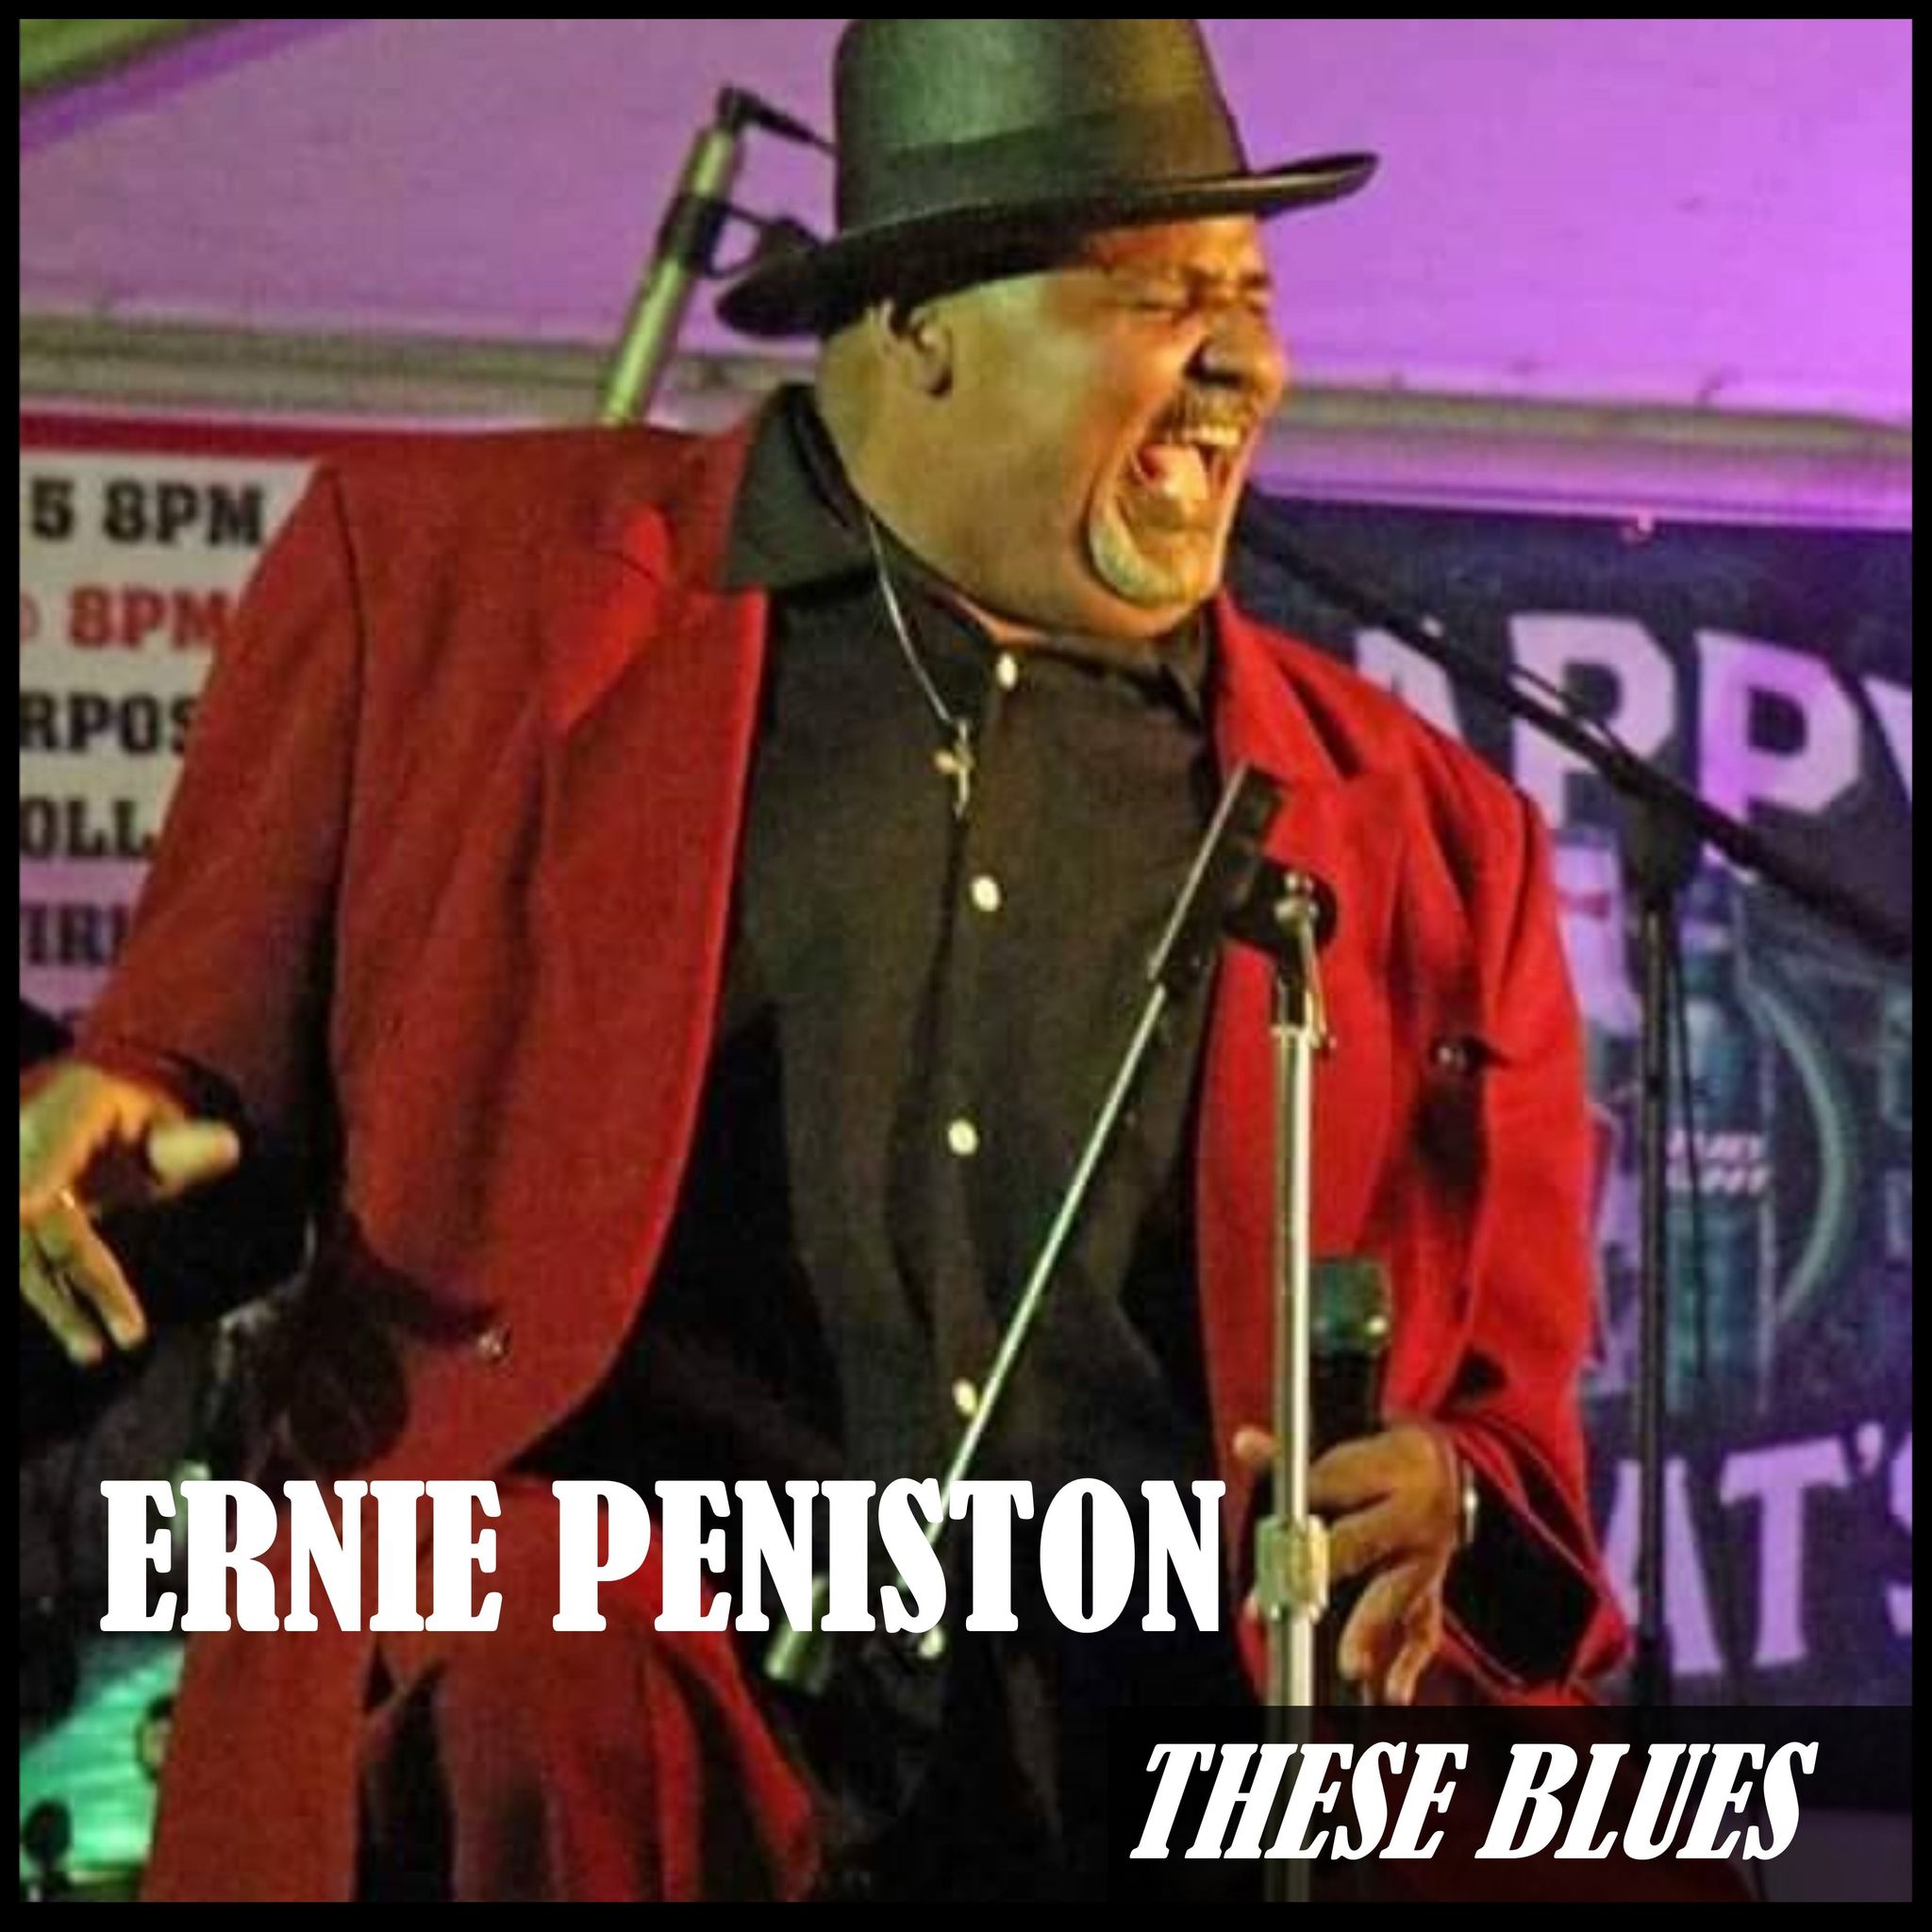 New Album “These Blues” from Ernie Peniston is a Funky Blues Masterpiece & Shares a Black Iowegian’s Perspective on Life and Love